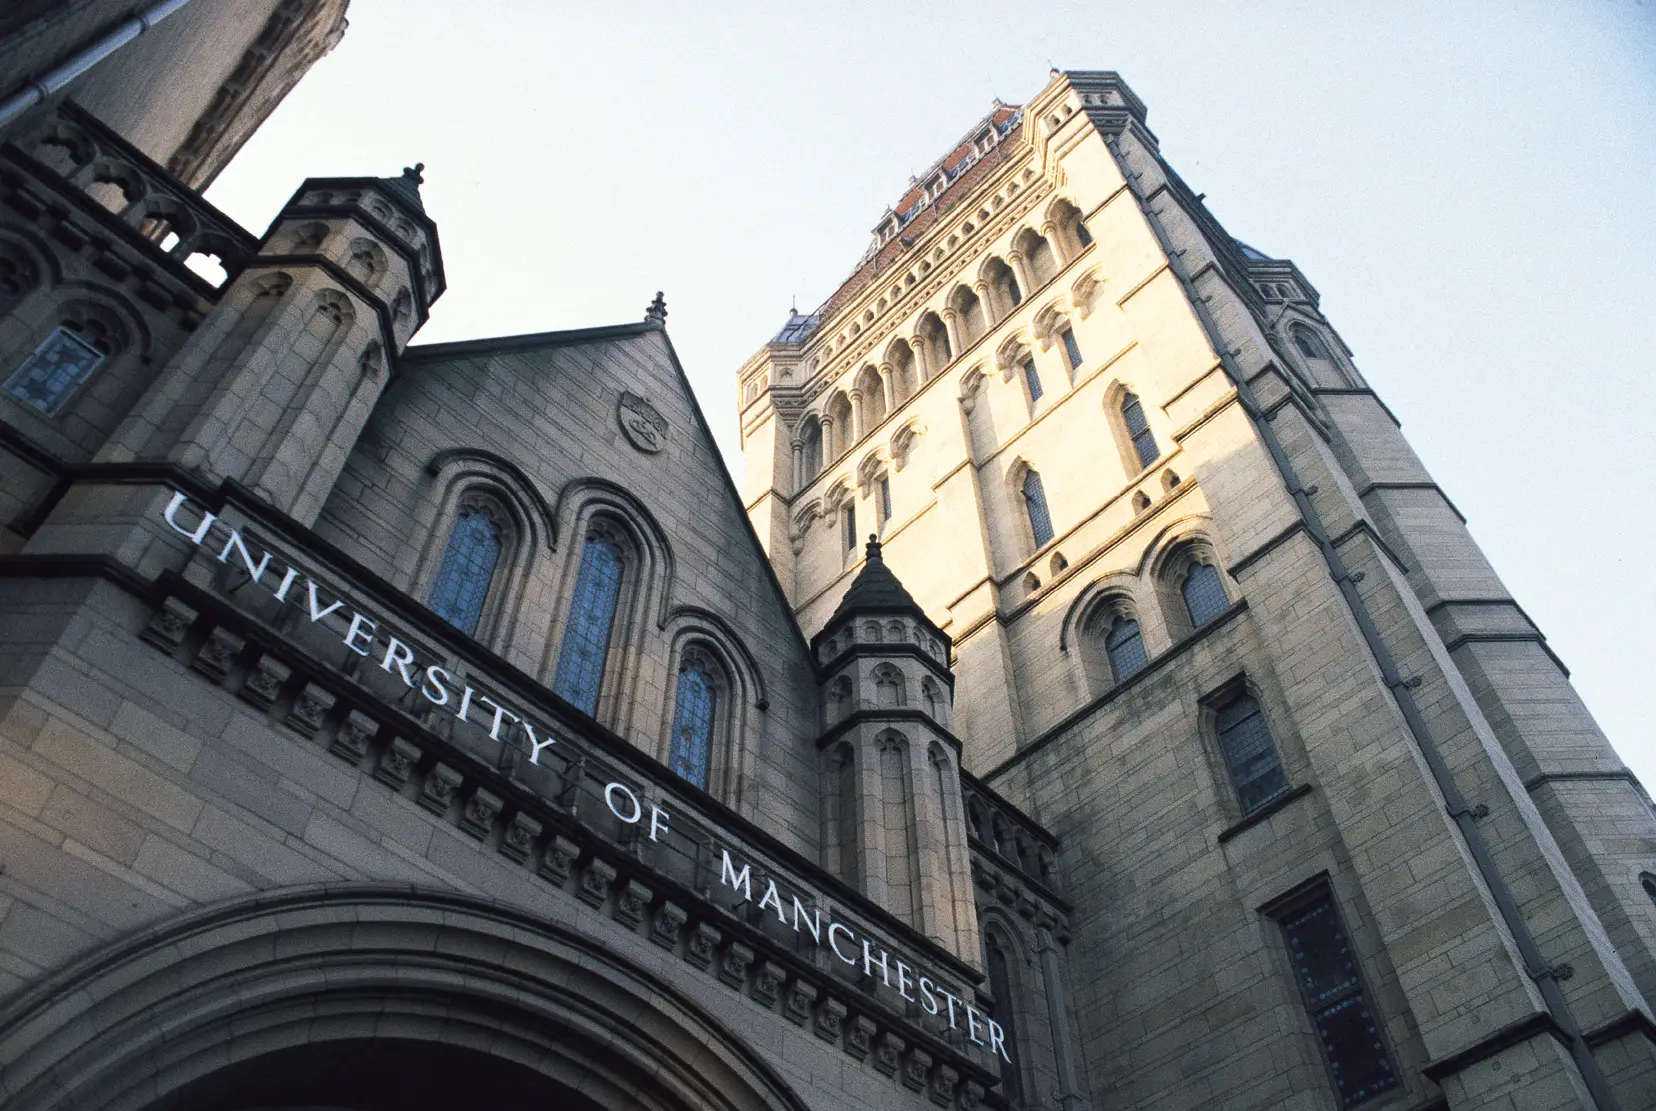 The research is based out of the University of Manchester